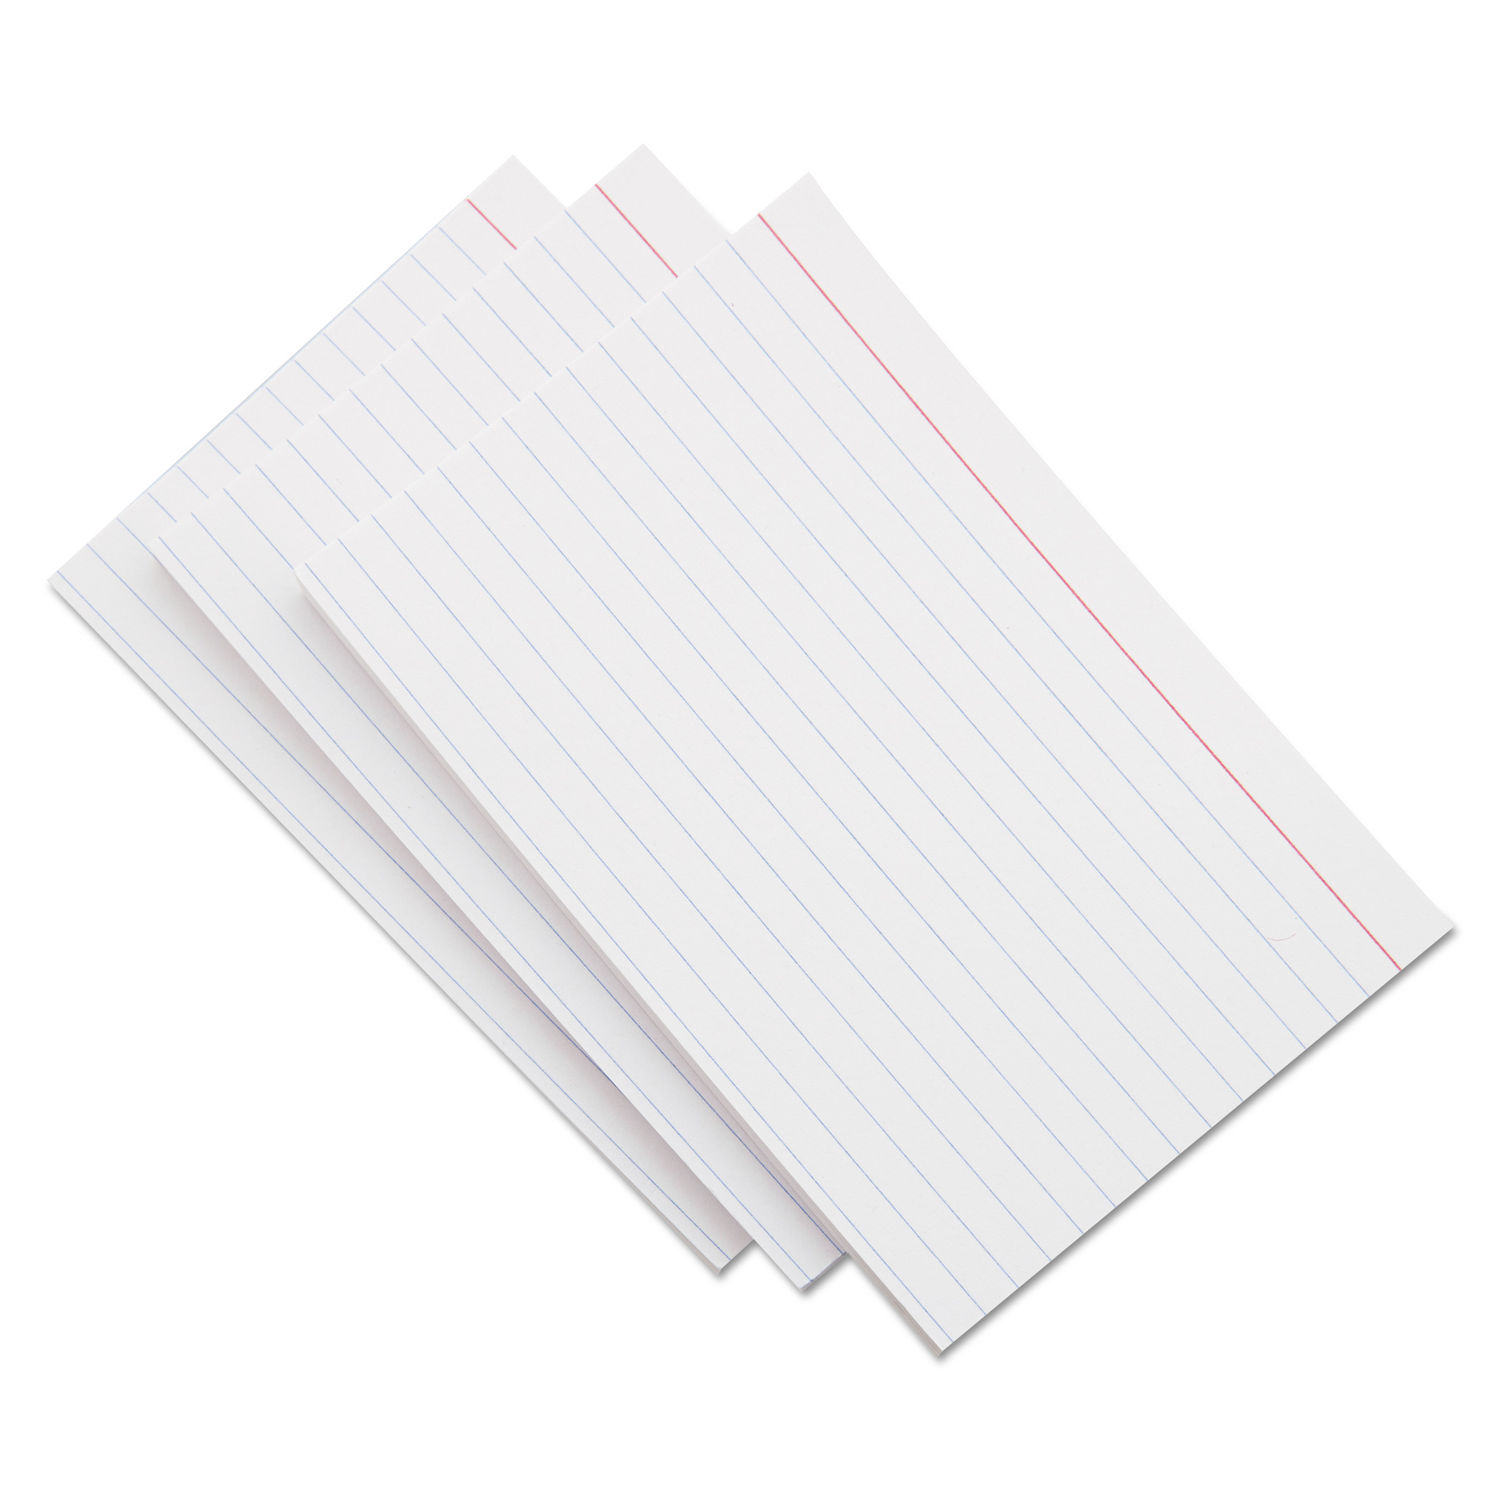 Ruled Index Cards 5 x 8, White, 100/Pack